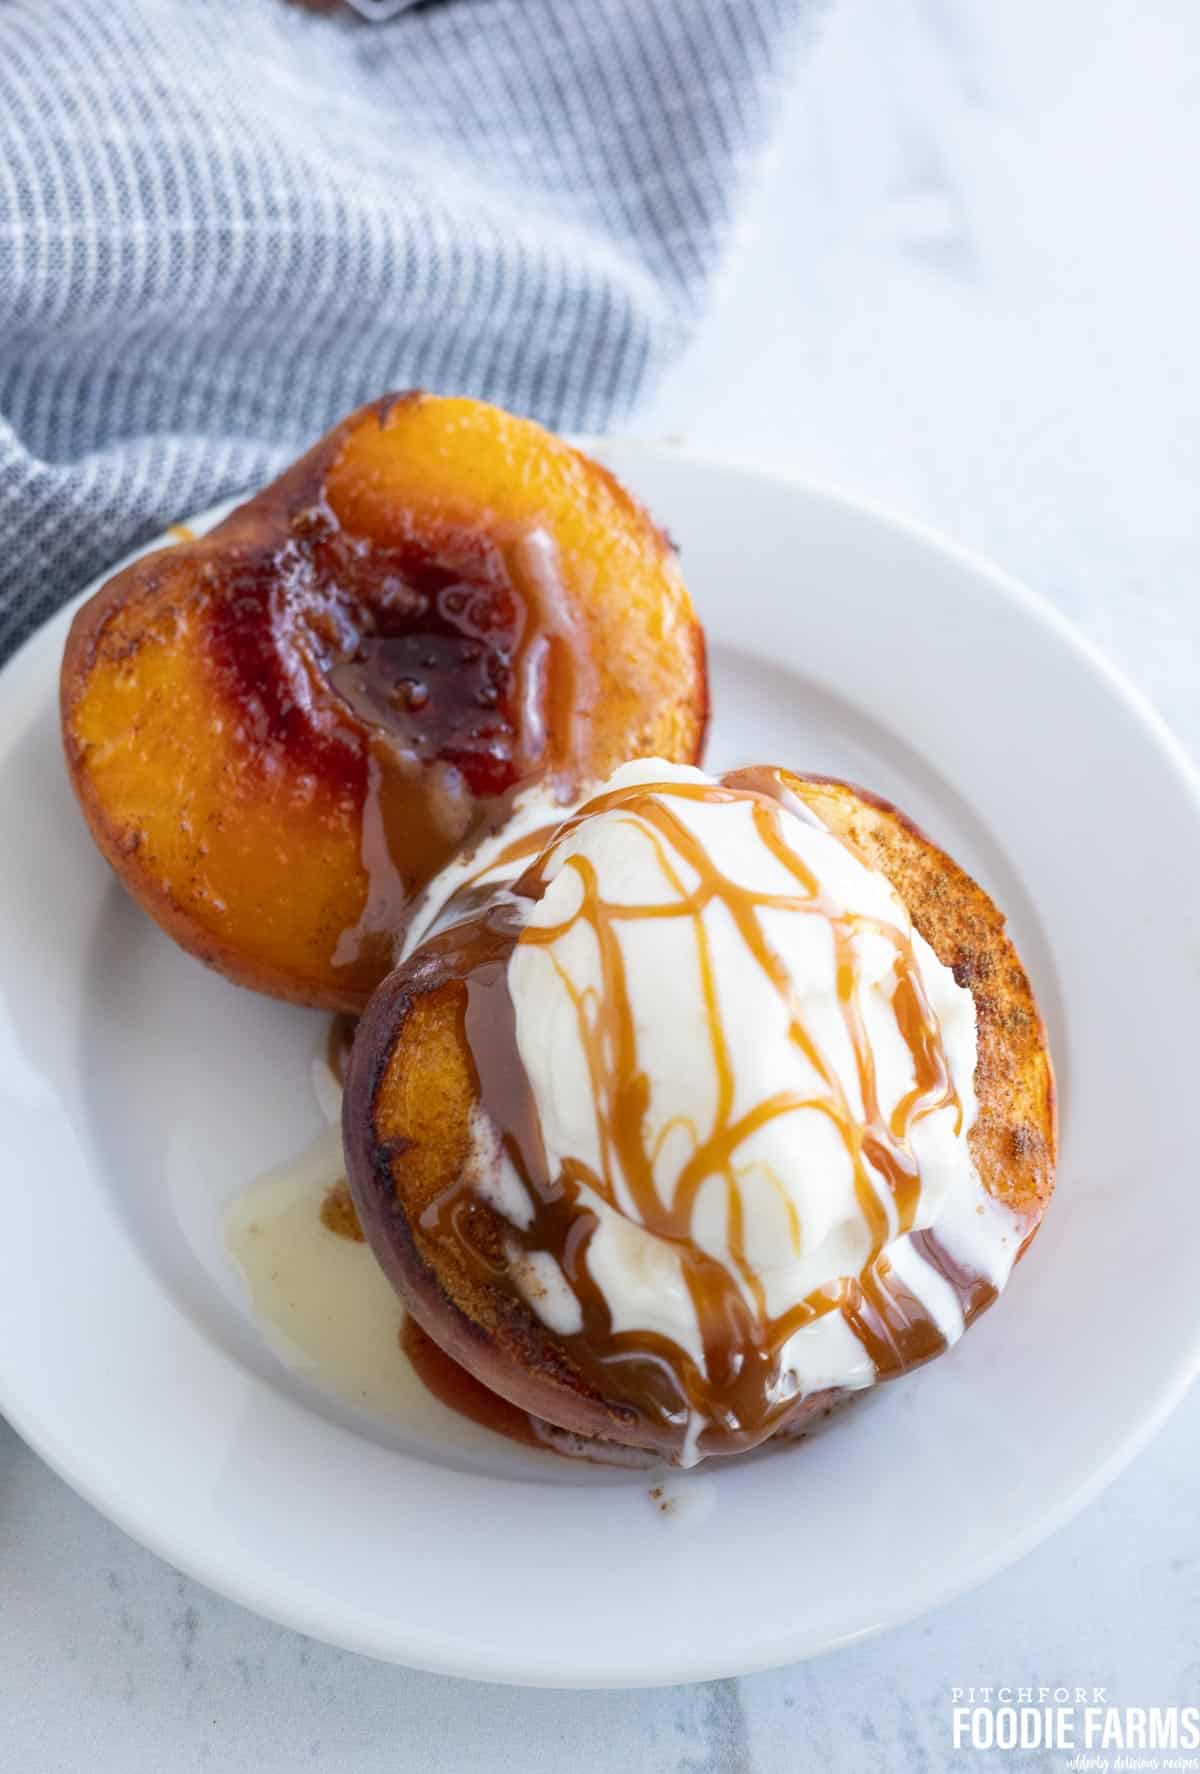 Two baked peach halves topped with vanilla ice cream and drizzled with caramel sauce.